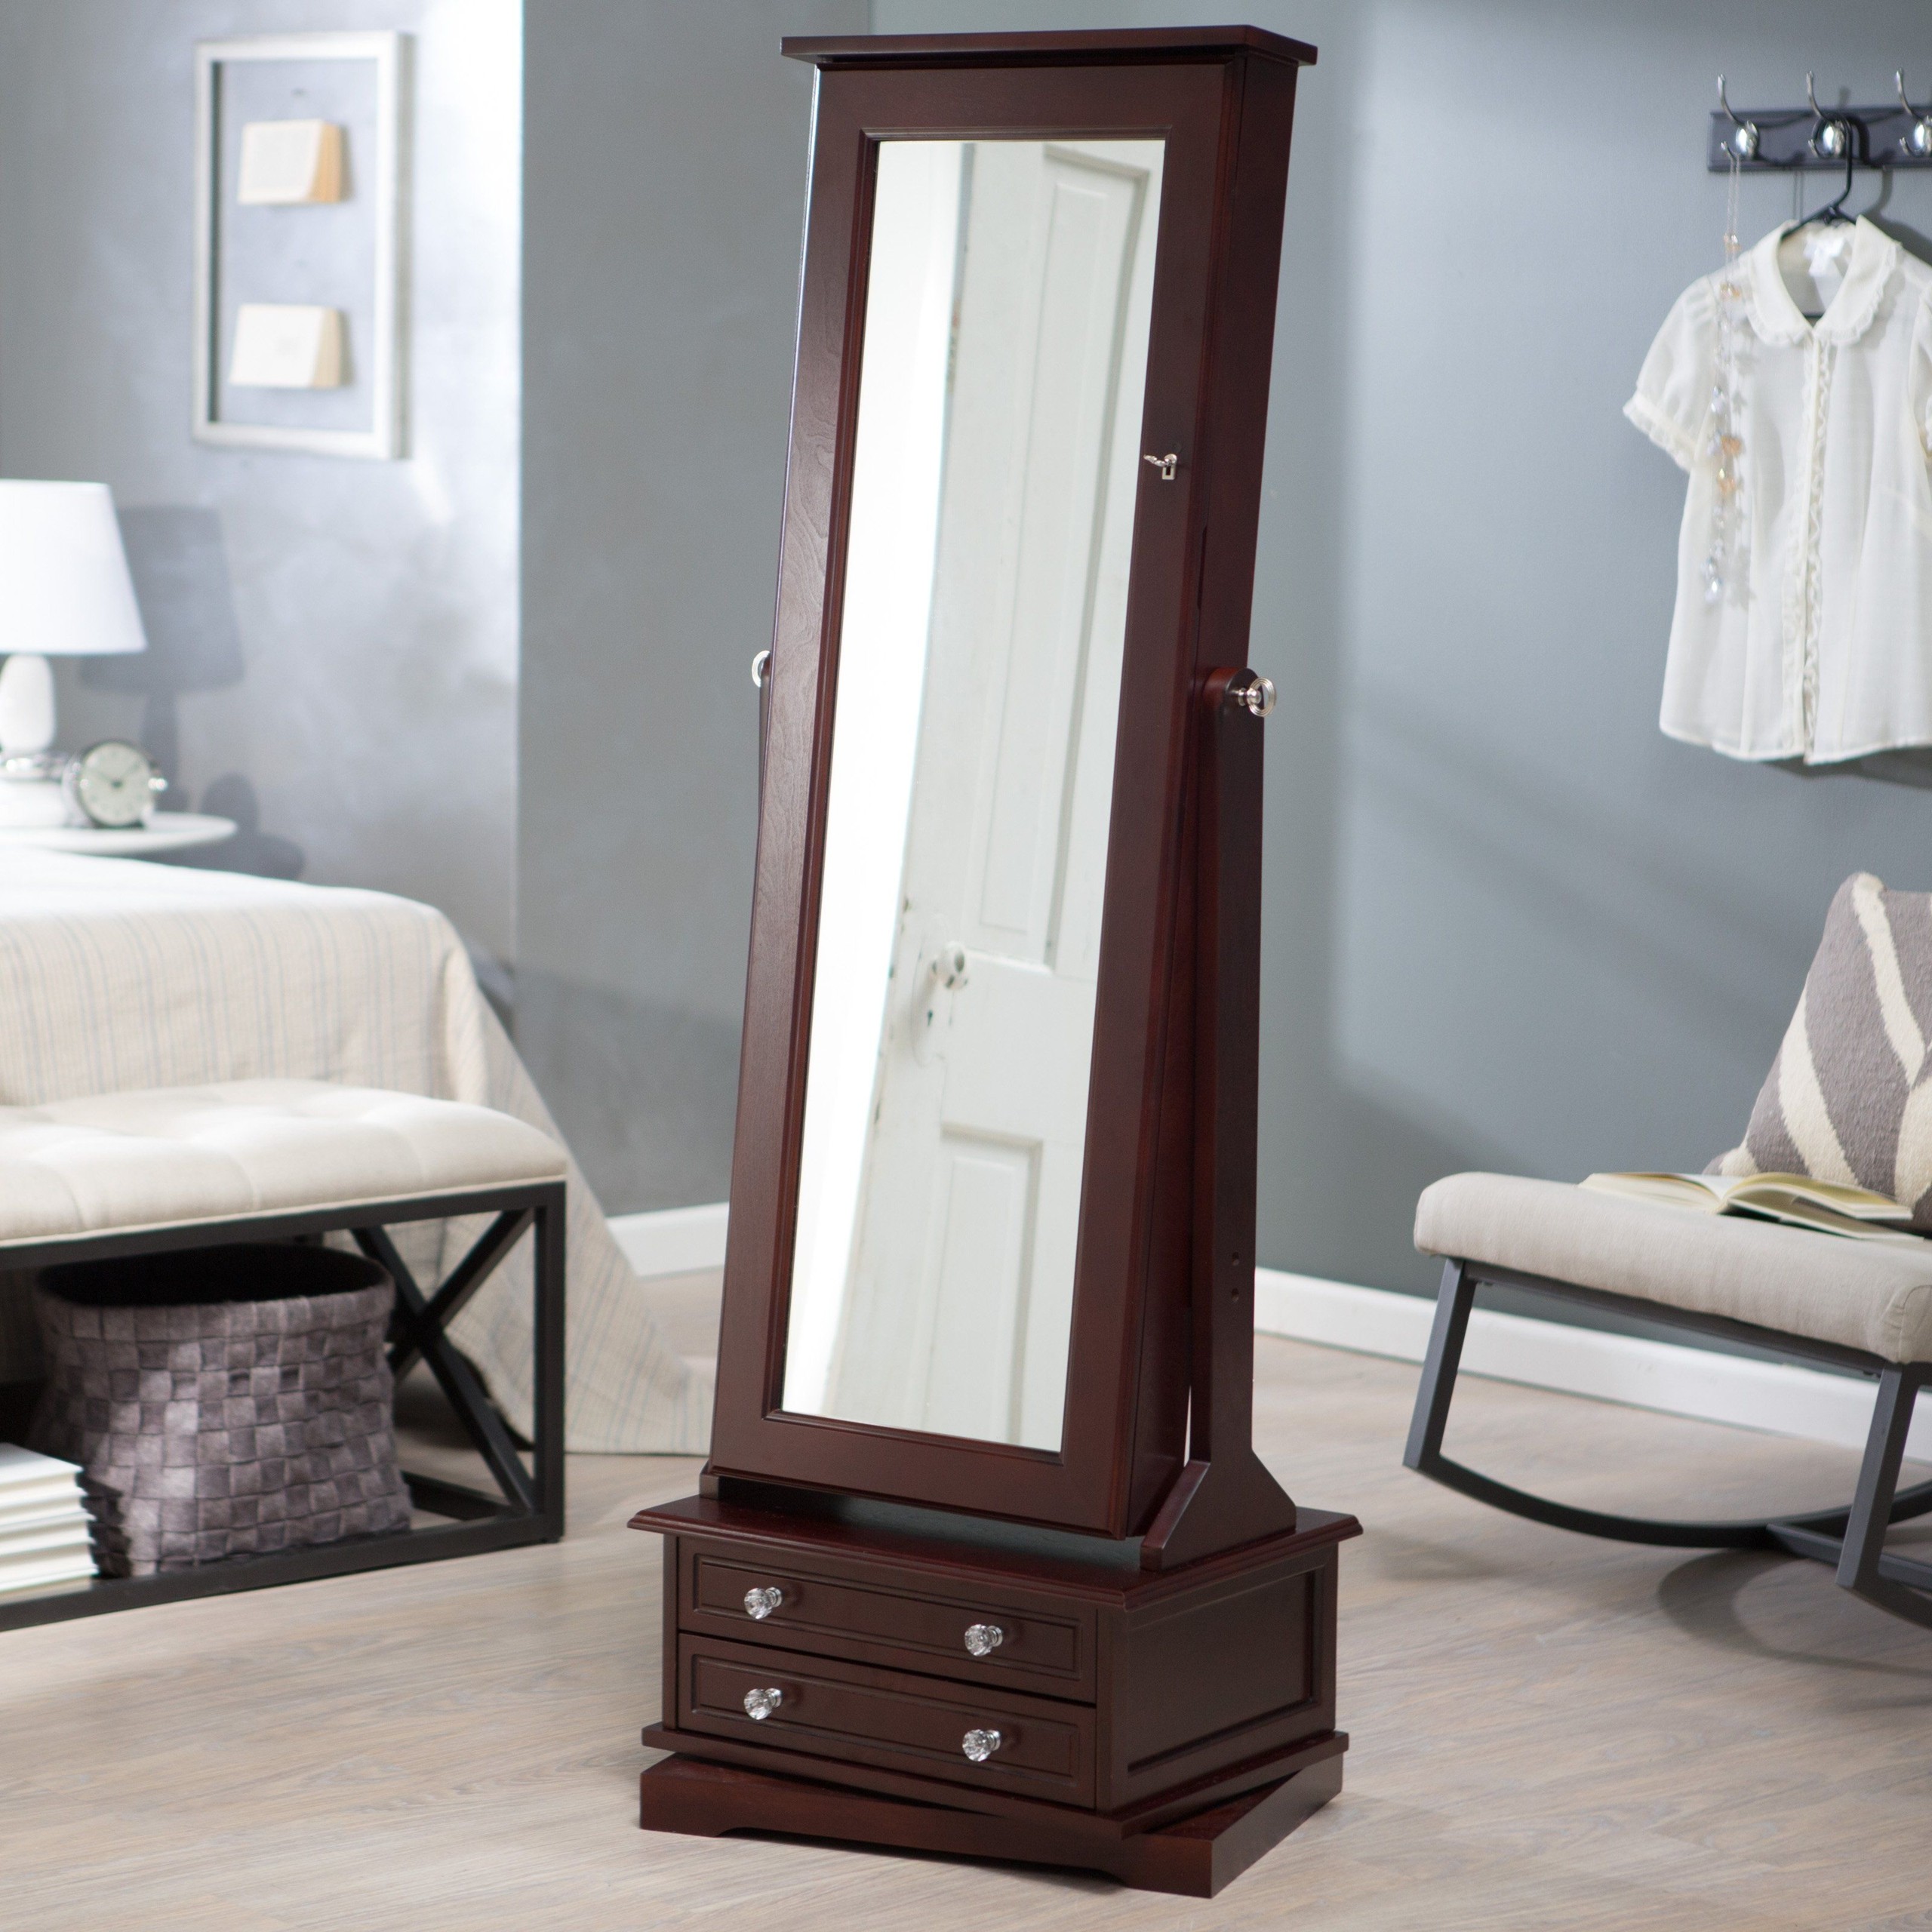 Standing mirror with storage